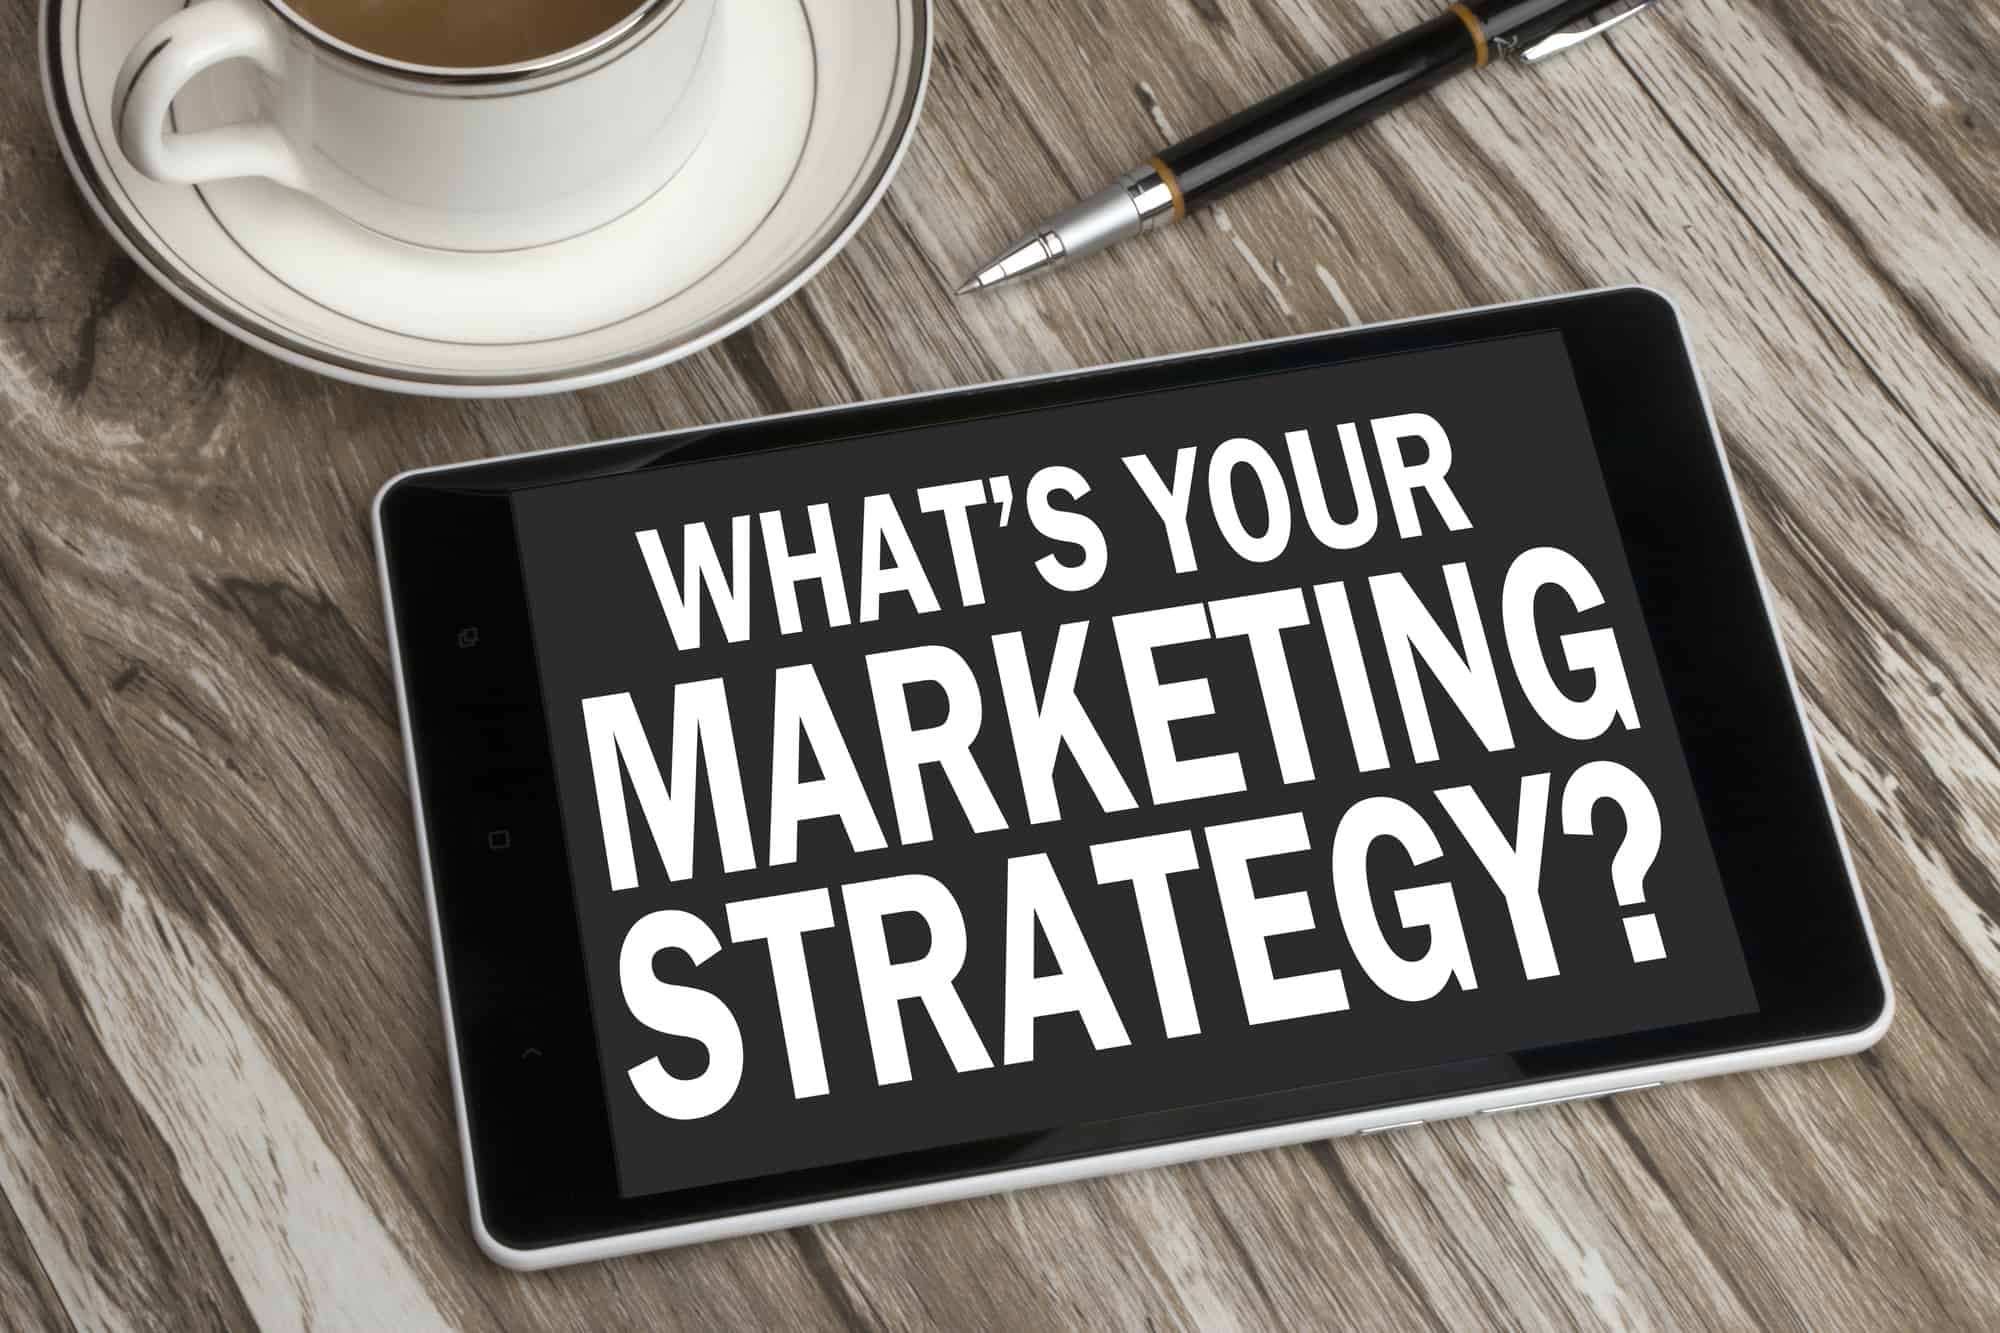 Aaron Vick - 9 Unique Marketing Strategies That'll Grow Your Startup